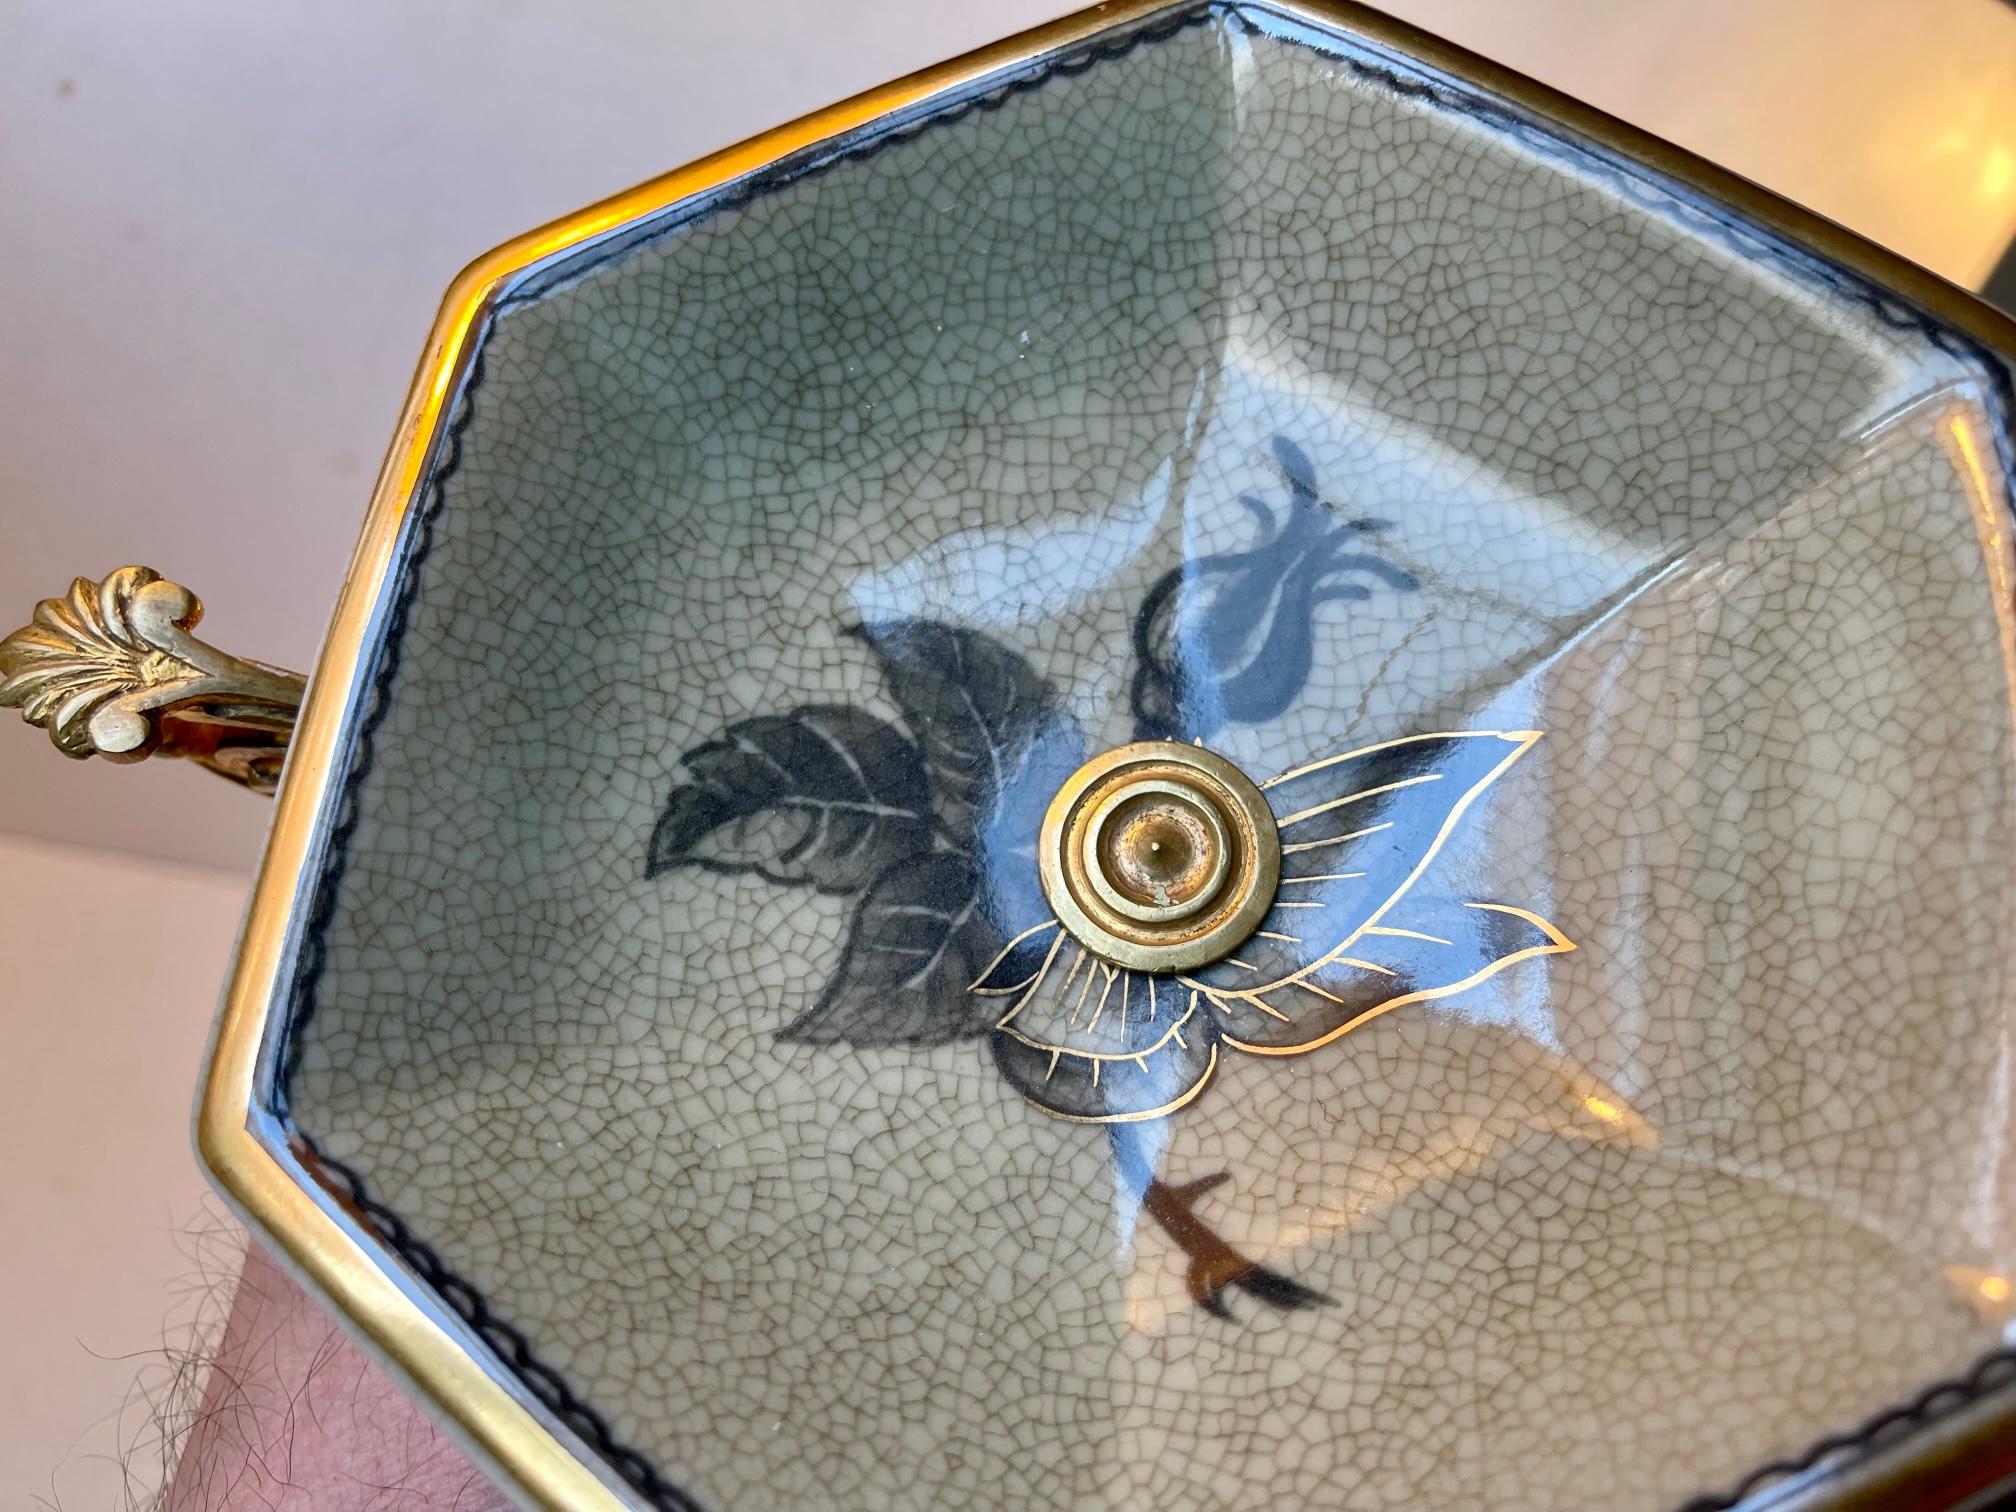 Vintage Faience & Brass Pedestal Chocolate Dish, Bonbonniere by Royal Copenhagen In Good Condition For Sale In Esbjerg, DK